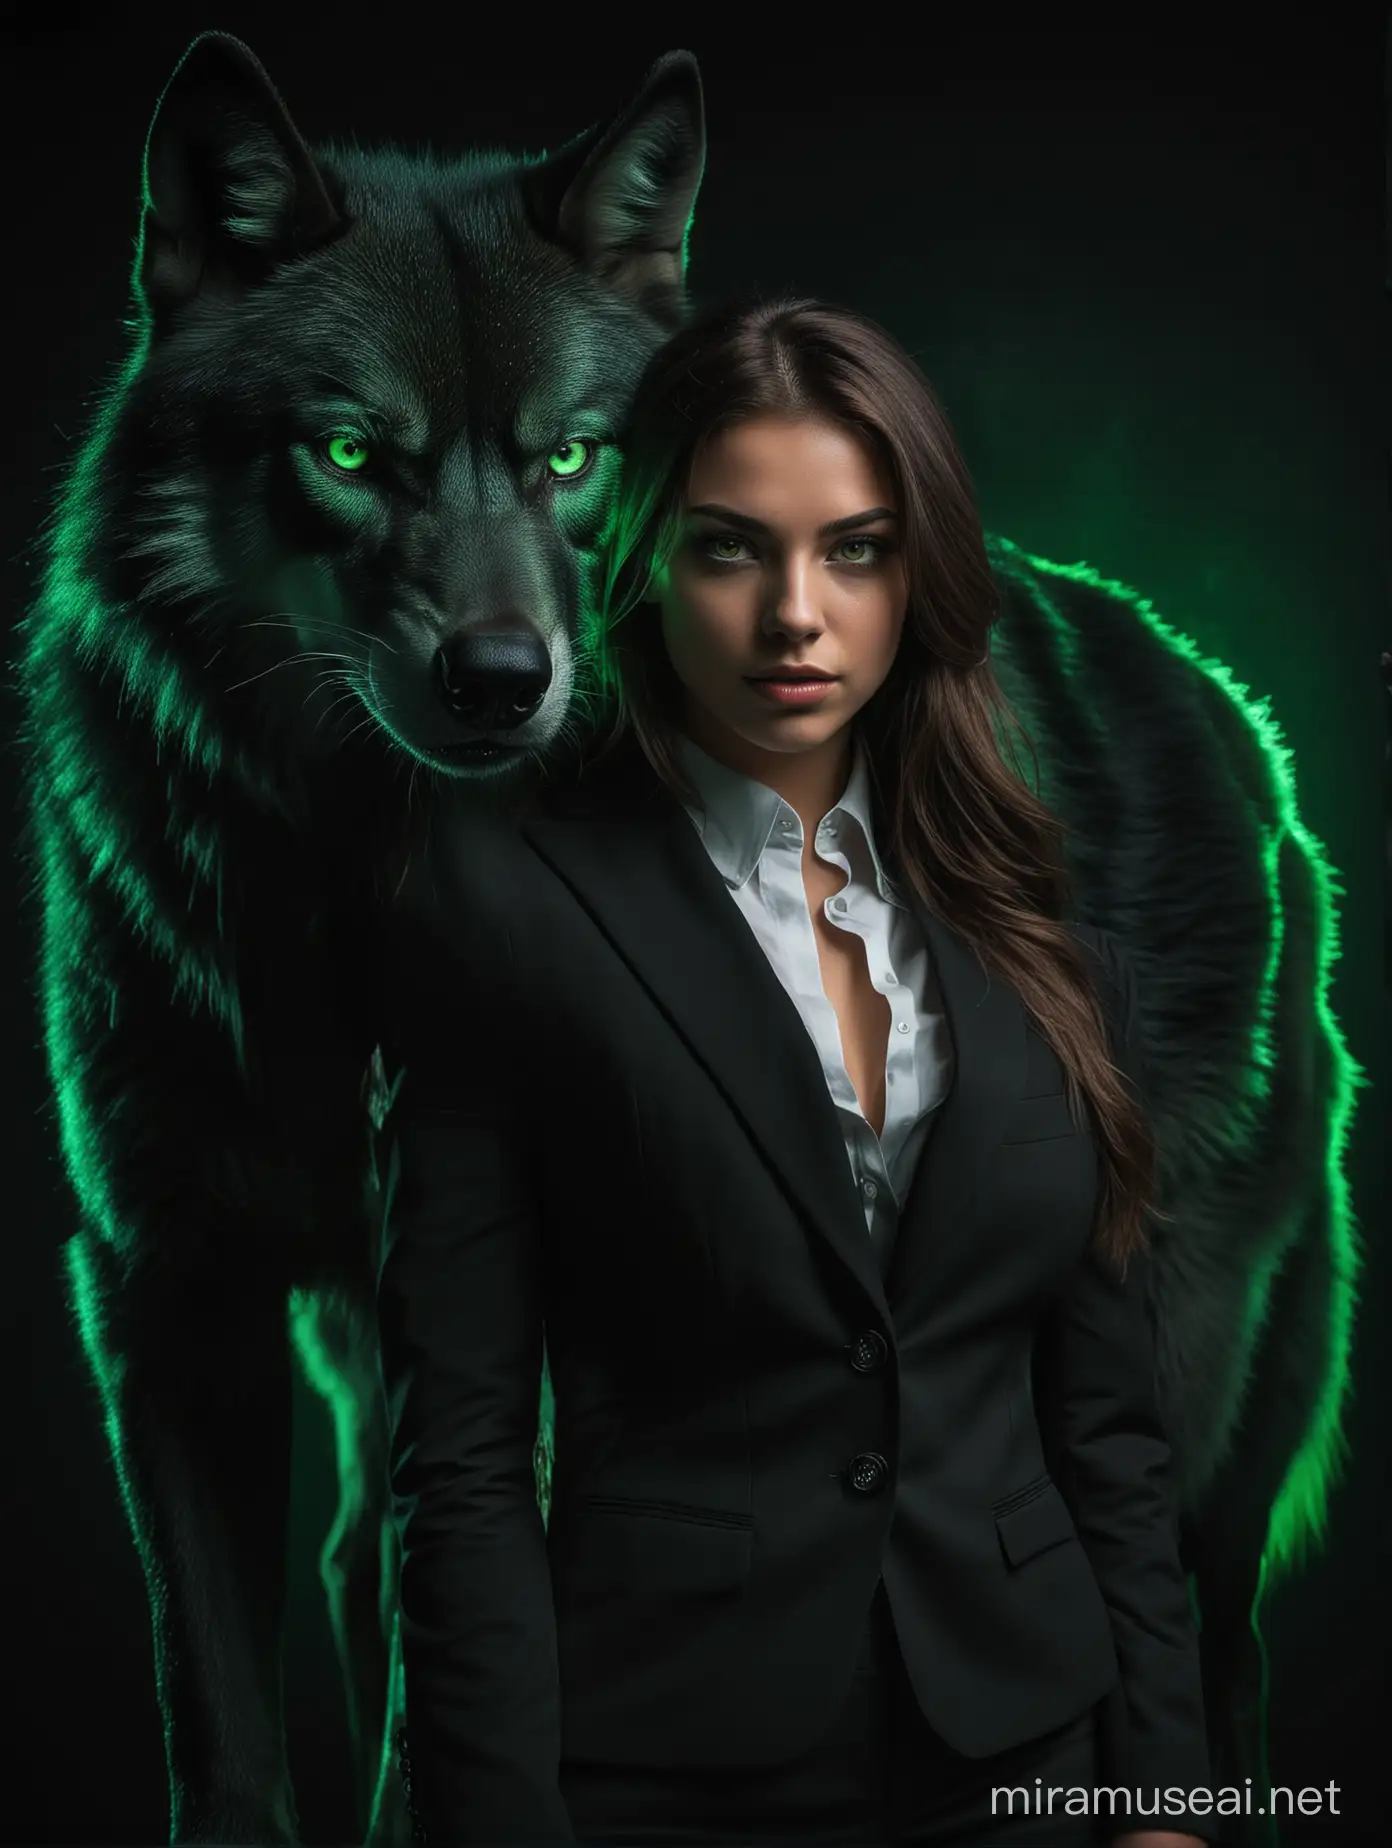 Glamorous Woman in Black Suit with Green Eyes and a menacing Green Wolf against a Dark Background